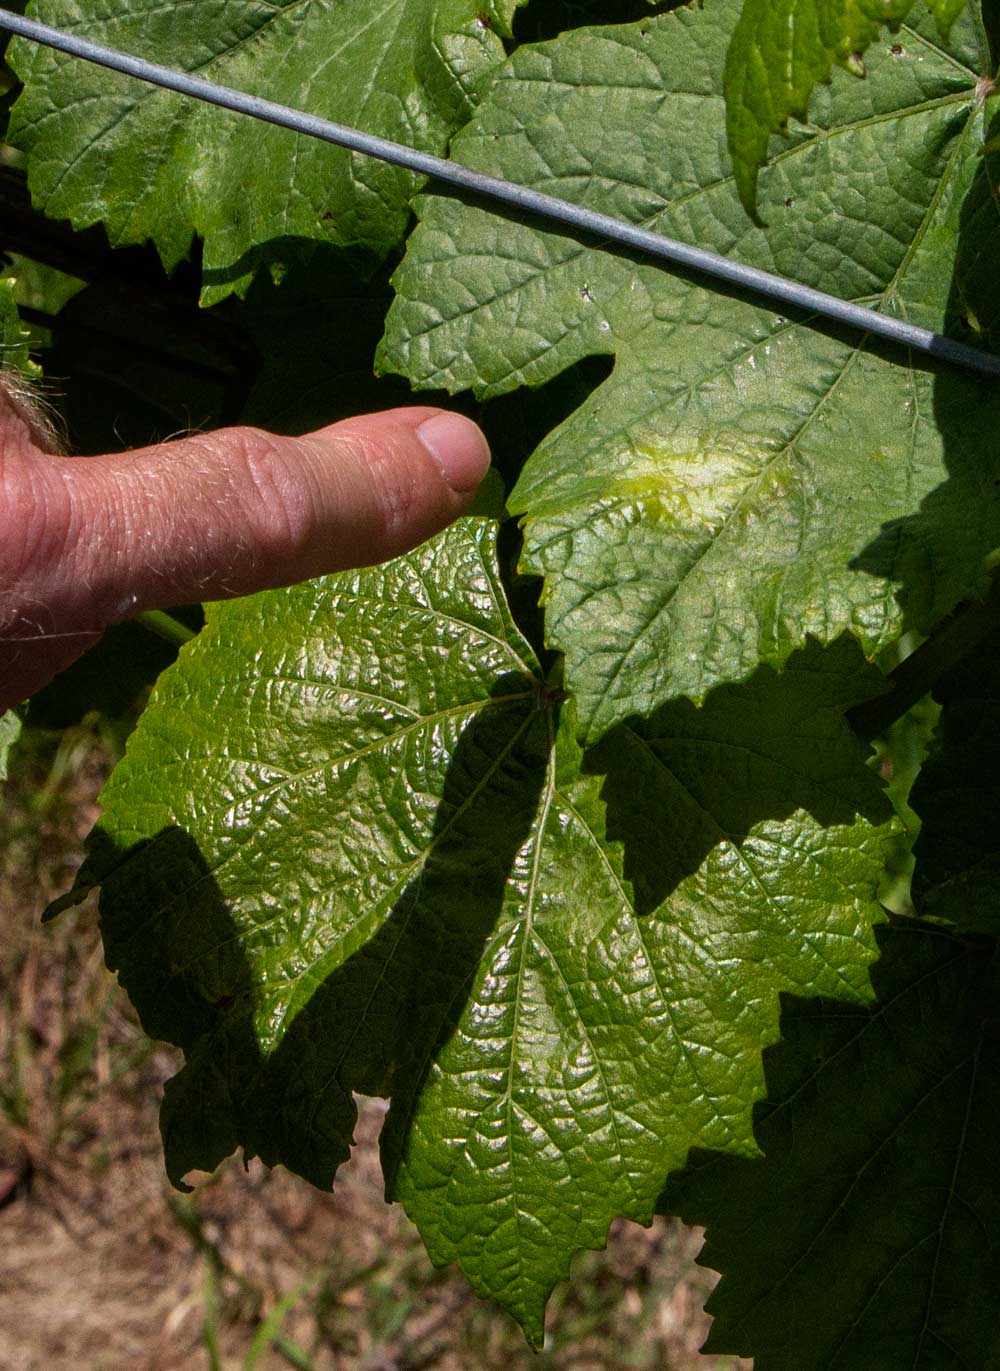 Kelly points to an oil stain spot that indicates the early development of downy mildew. Due to the hot, humid weather, downy mildew and powdery mildew are constant challenges for Virginia Vineyards. (Kate Prengaman/Good Fruit Grower)